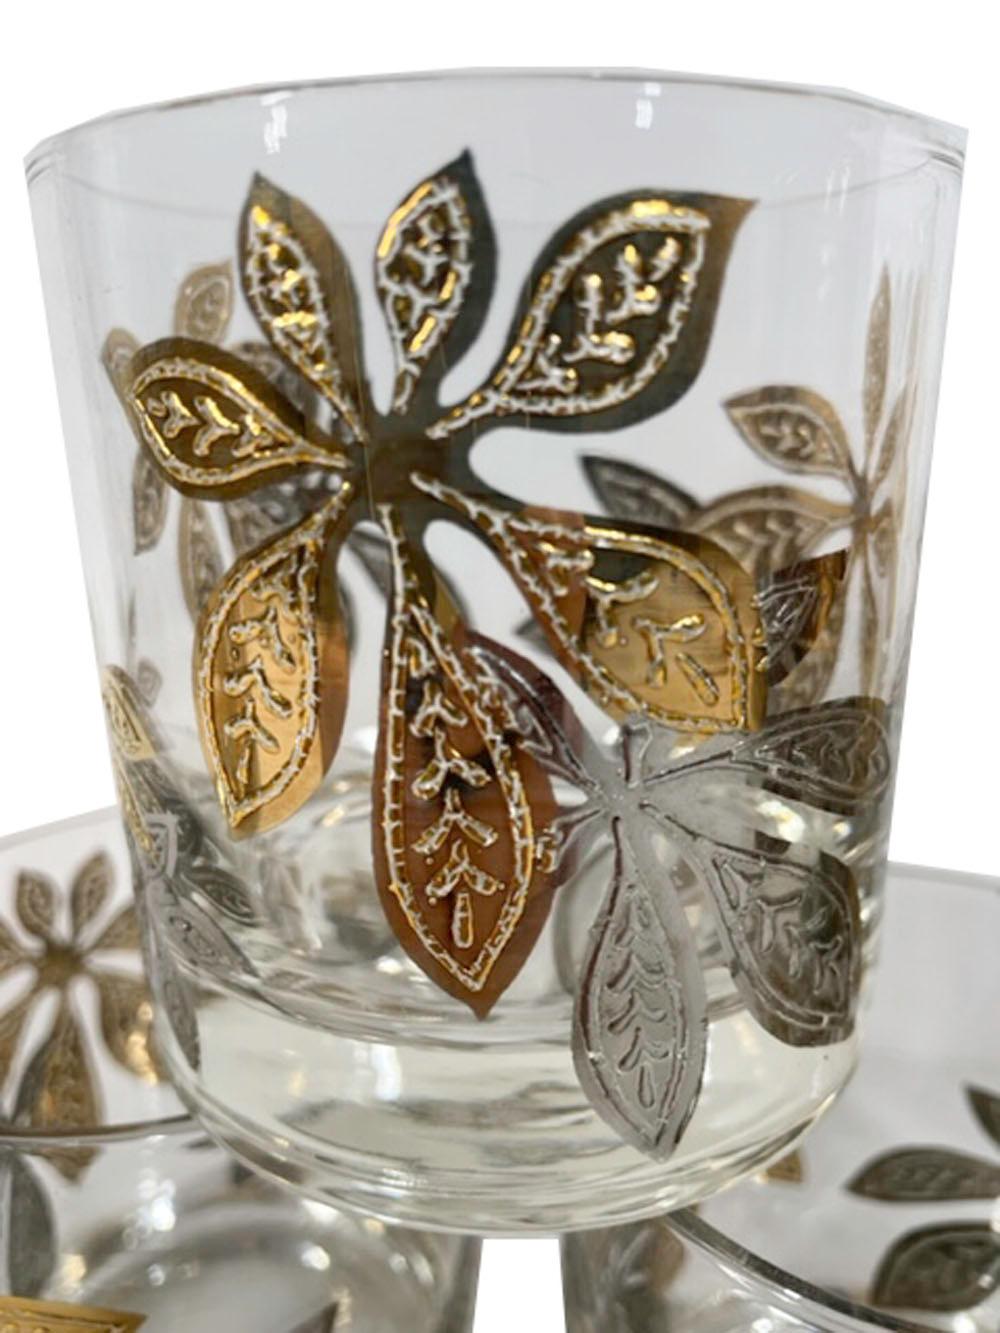 American Mid-Century Modern Rocks Glasses by Culver, LTD. with Leaves in Gold and Silver For Sale